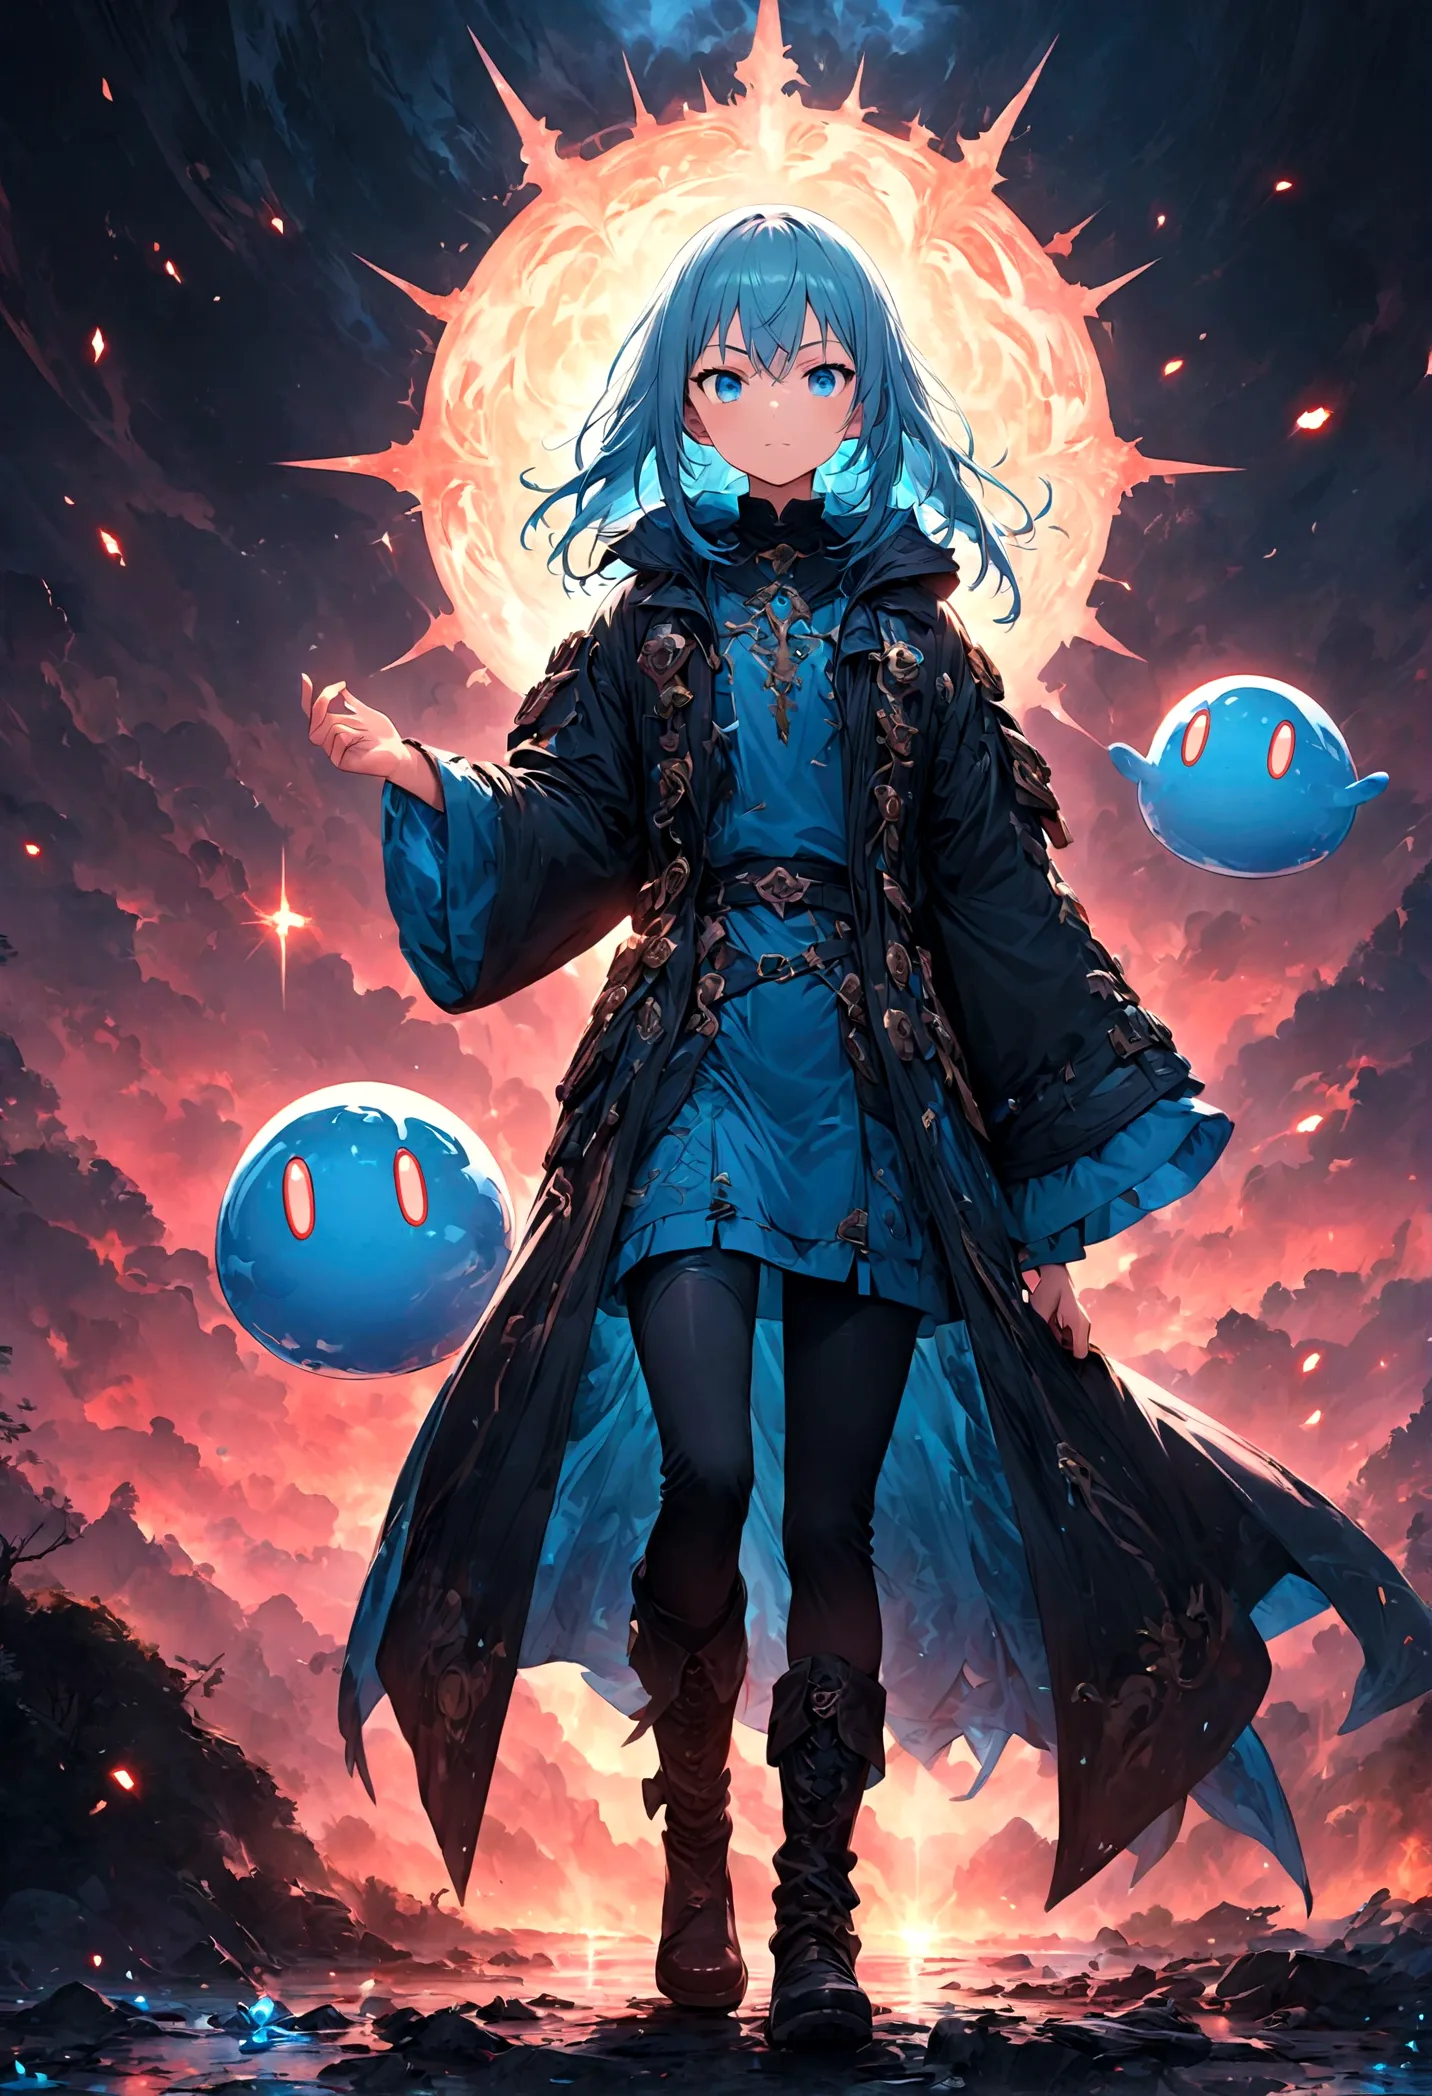 1 teenager,Rimuru Tempest,Create an image of Rimuru Tempest from the manga and anime 'That Time I Got Reincarnated as a Slime'. ...